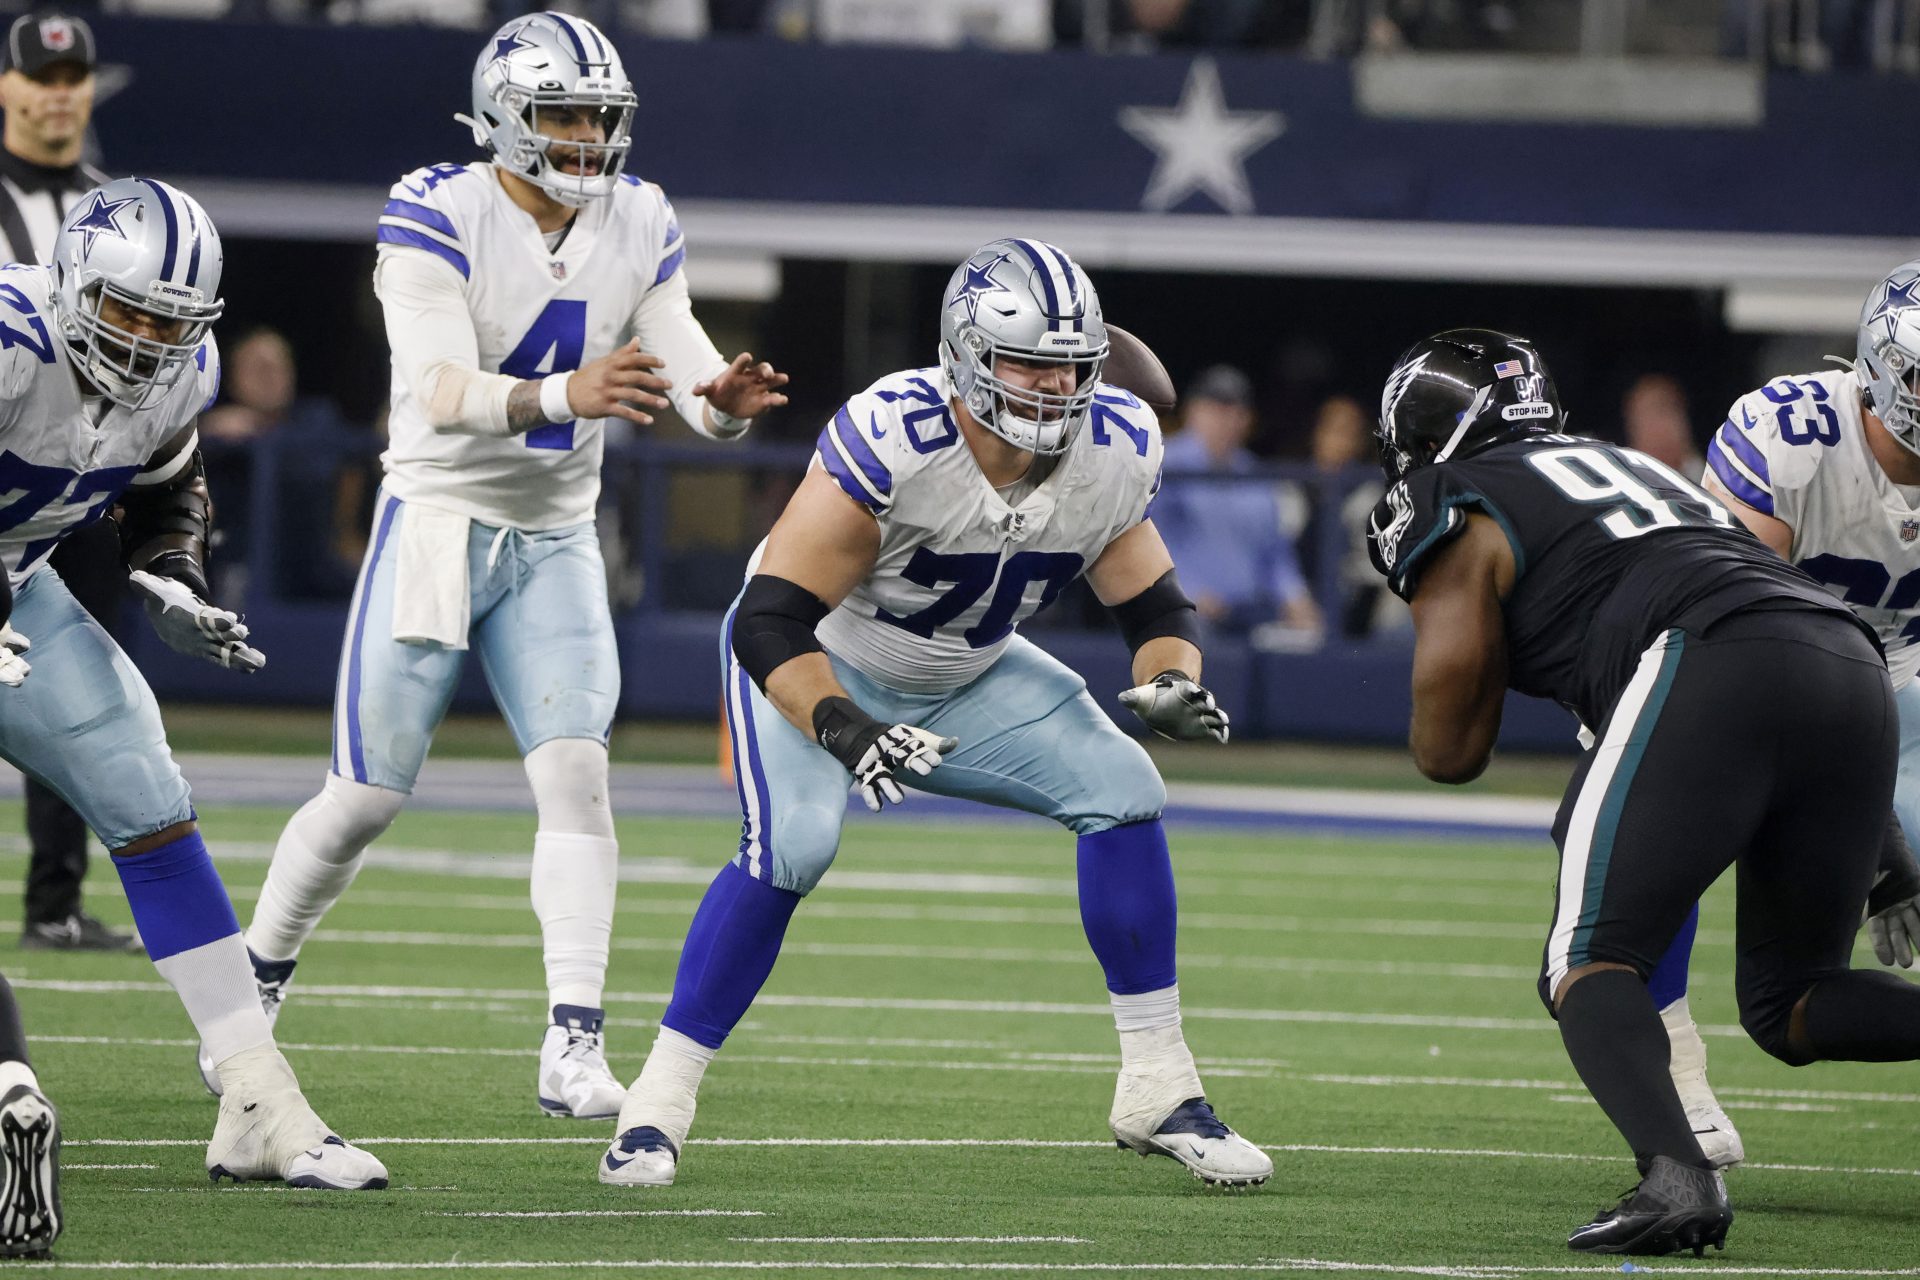 Prescott, TEs help Cowboys to Thanksgiving win over Giants